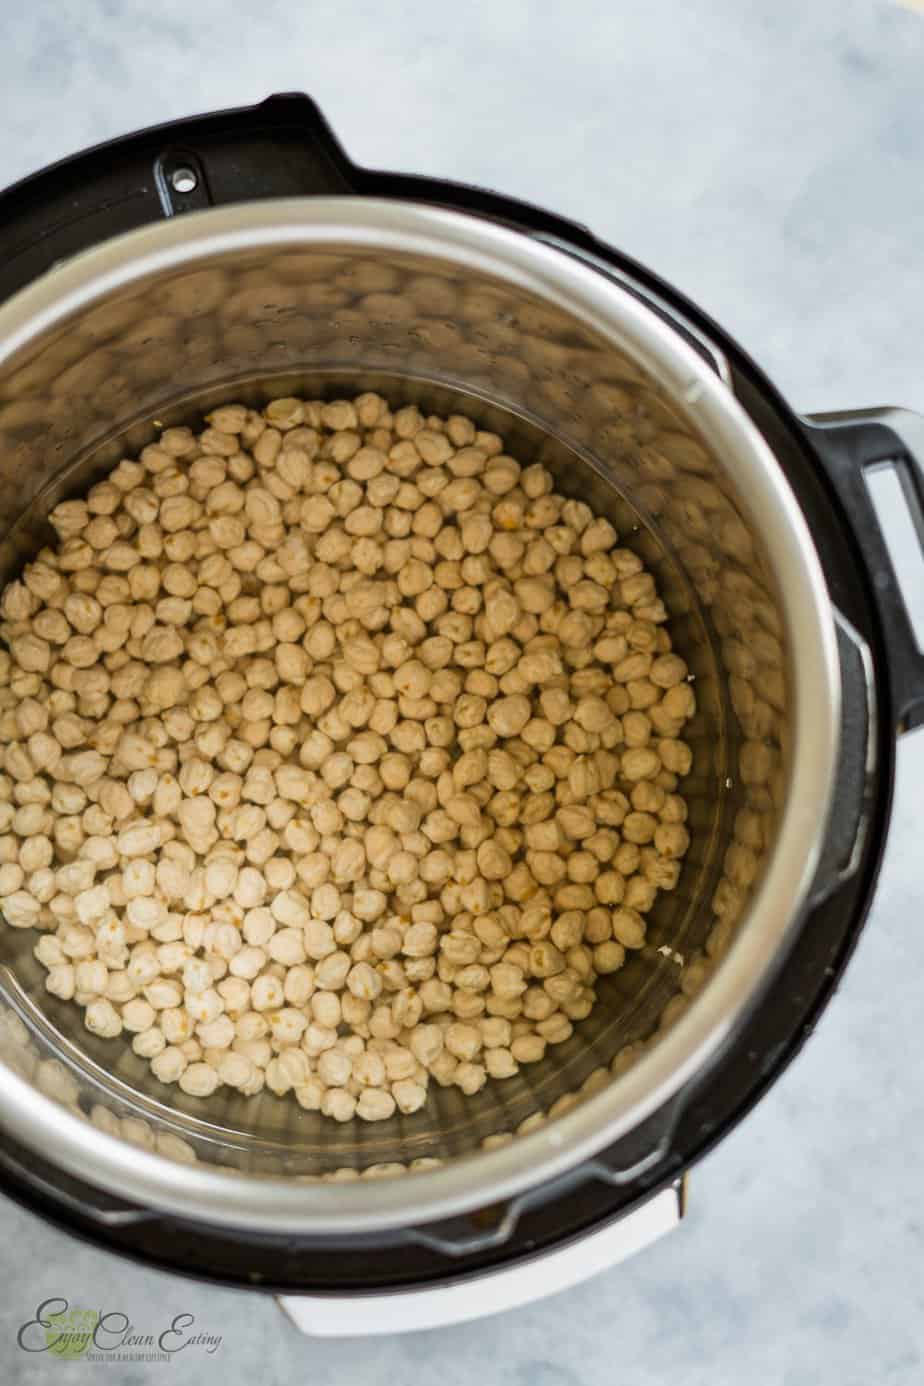 only two ingredients inside the instant pot dried chickpea and water